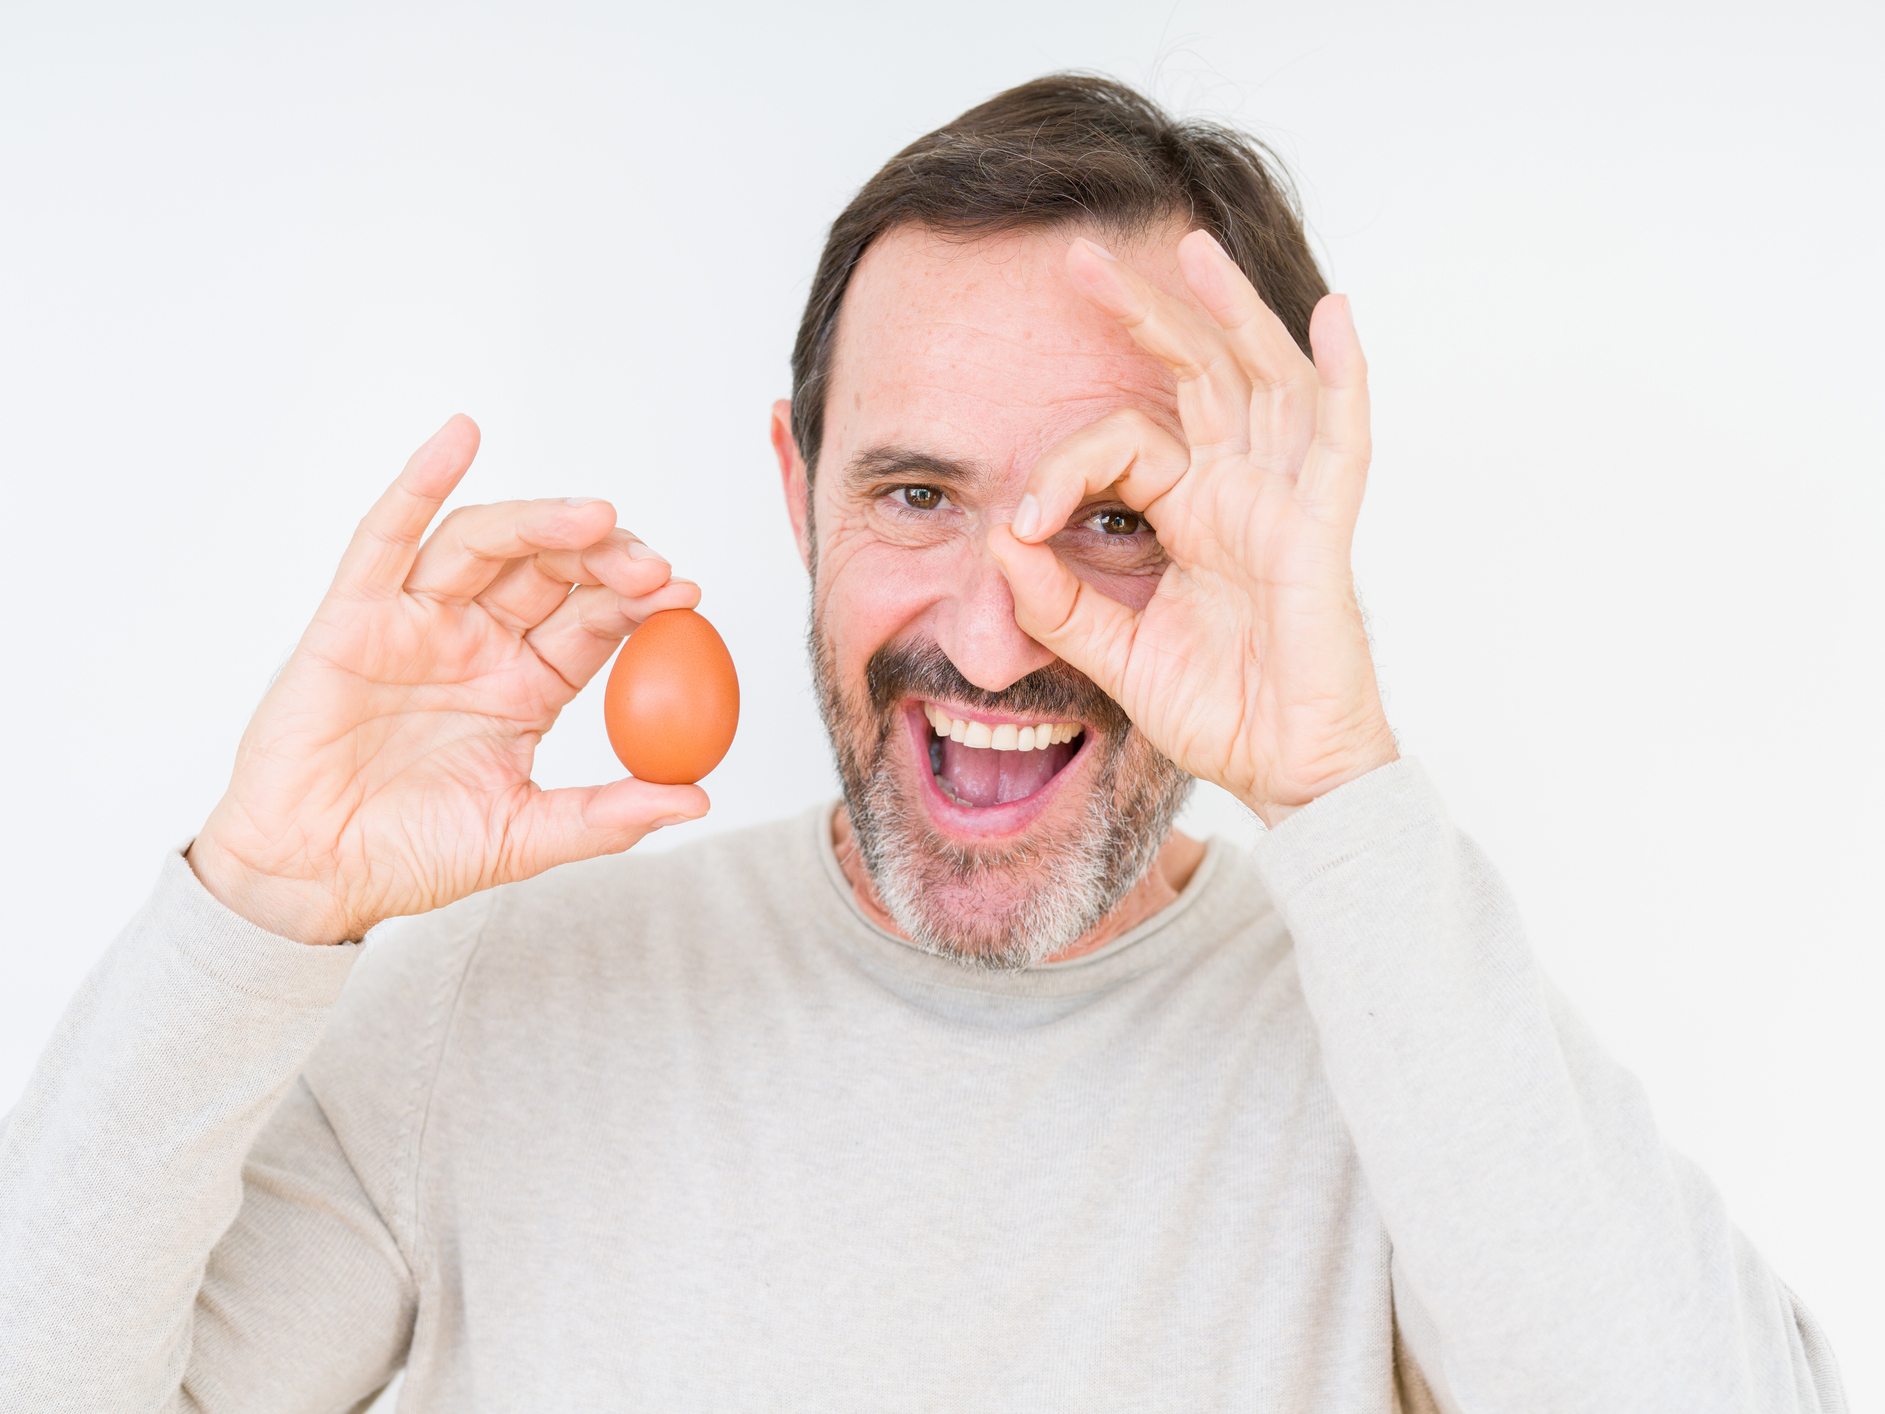 How many eggs can you eat daily and stay heart healthy?